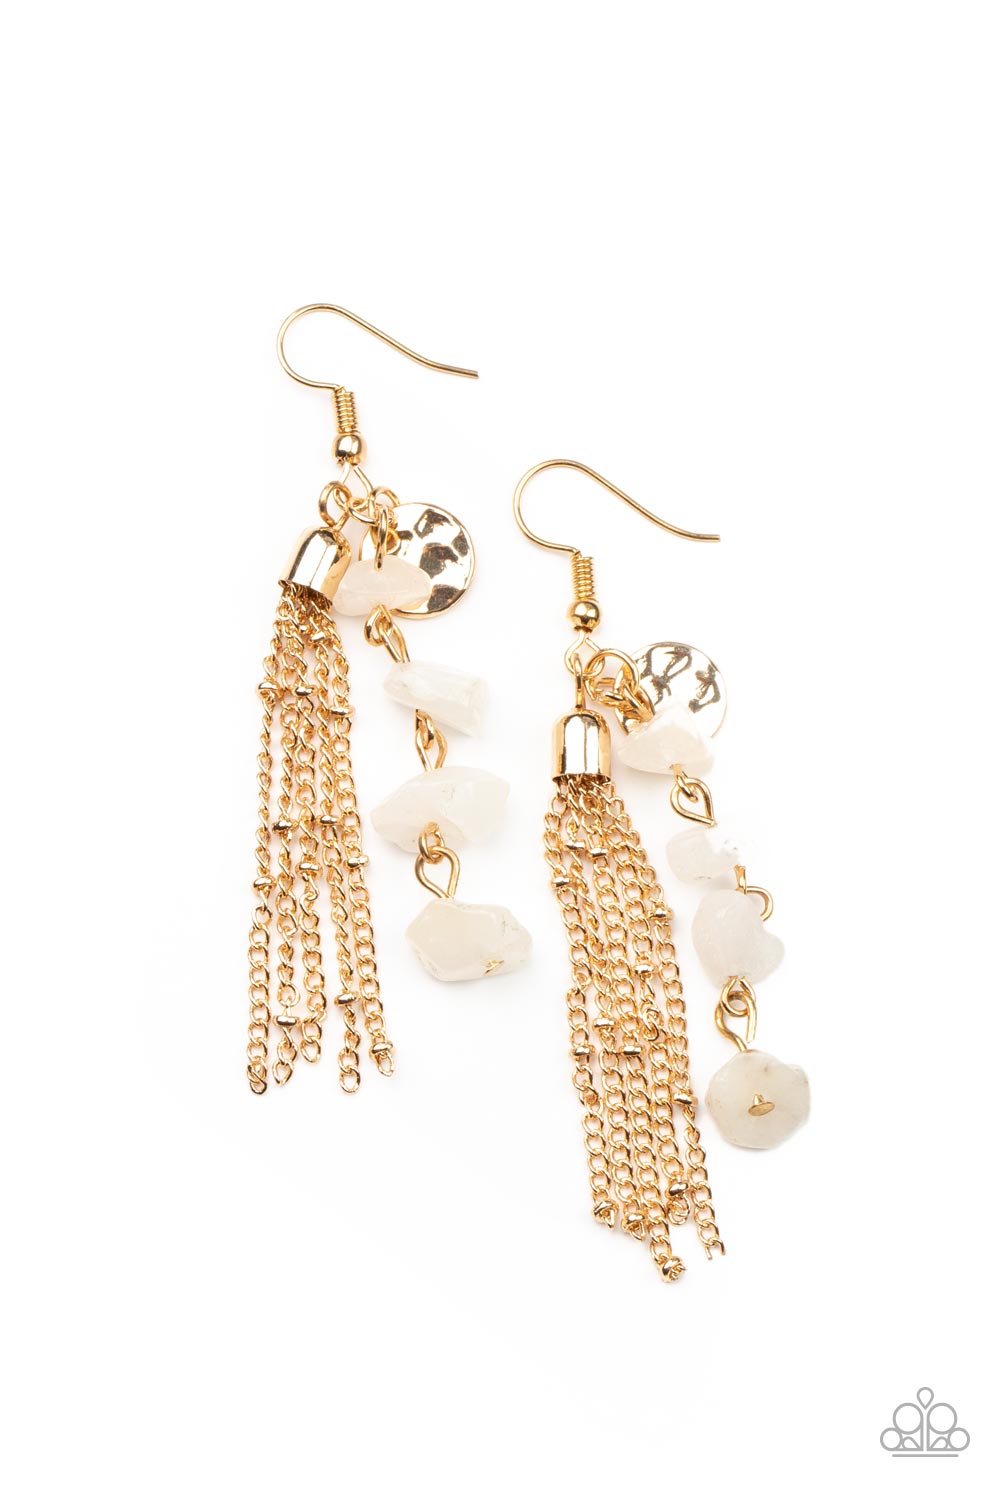 Stone Sensation - Gold Rock Bead Earrings hammered gold disc, gold chain tassel, and strand of raw cut white rock beads delicately stream from the ear, creating an earthy fringe. Earring attaches to a standard fishhook fitting.  Sold as one pair of earrings.